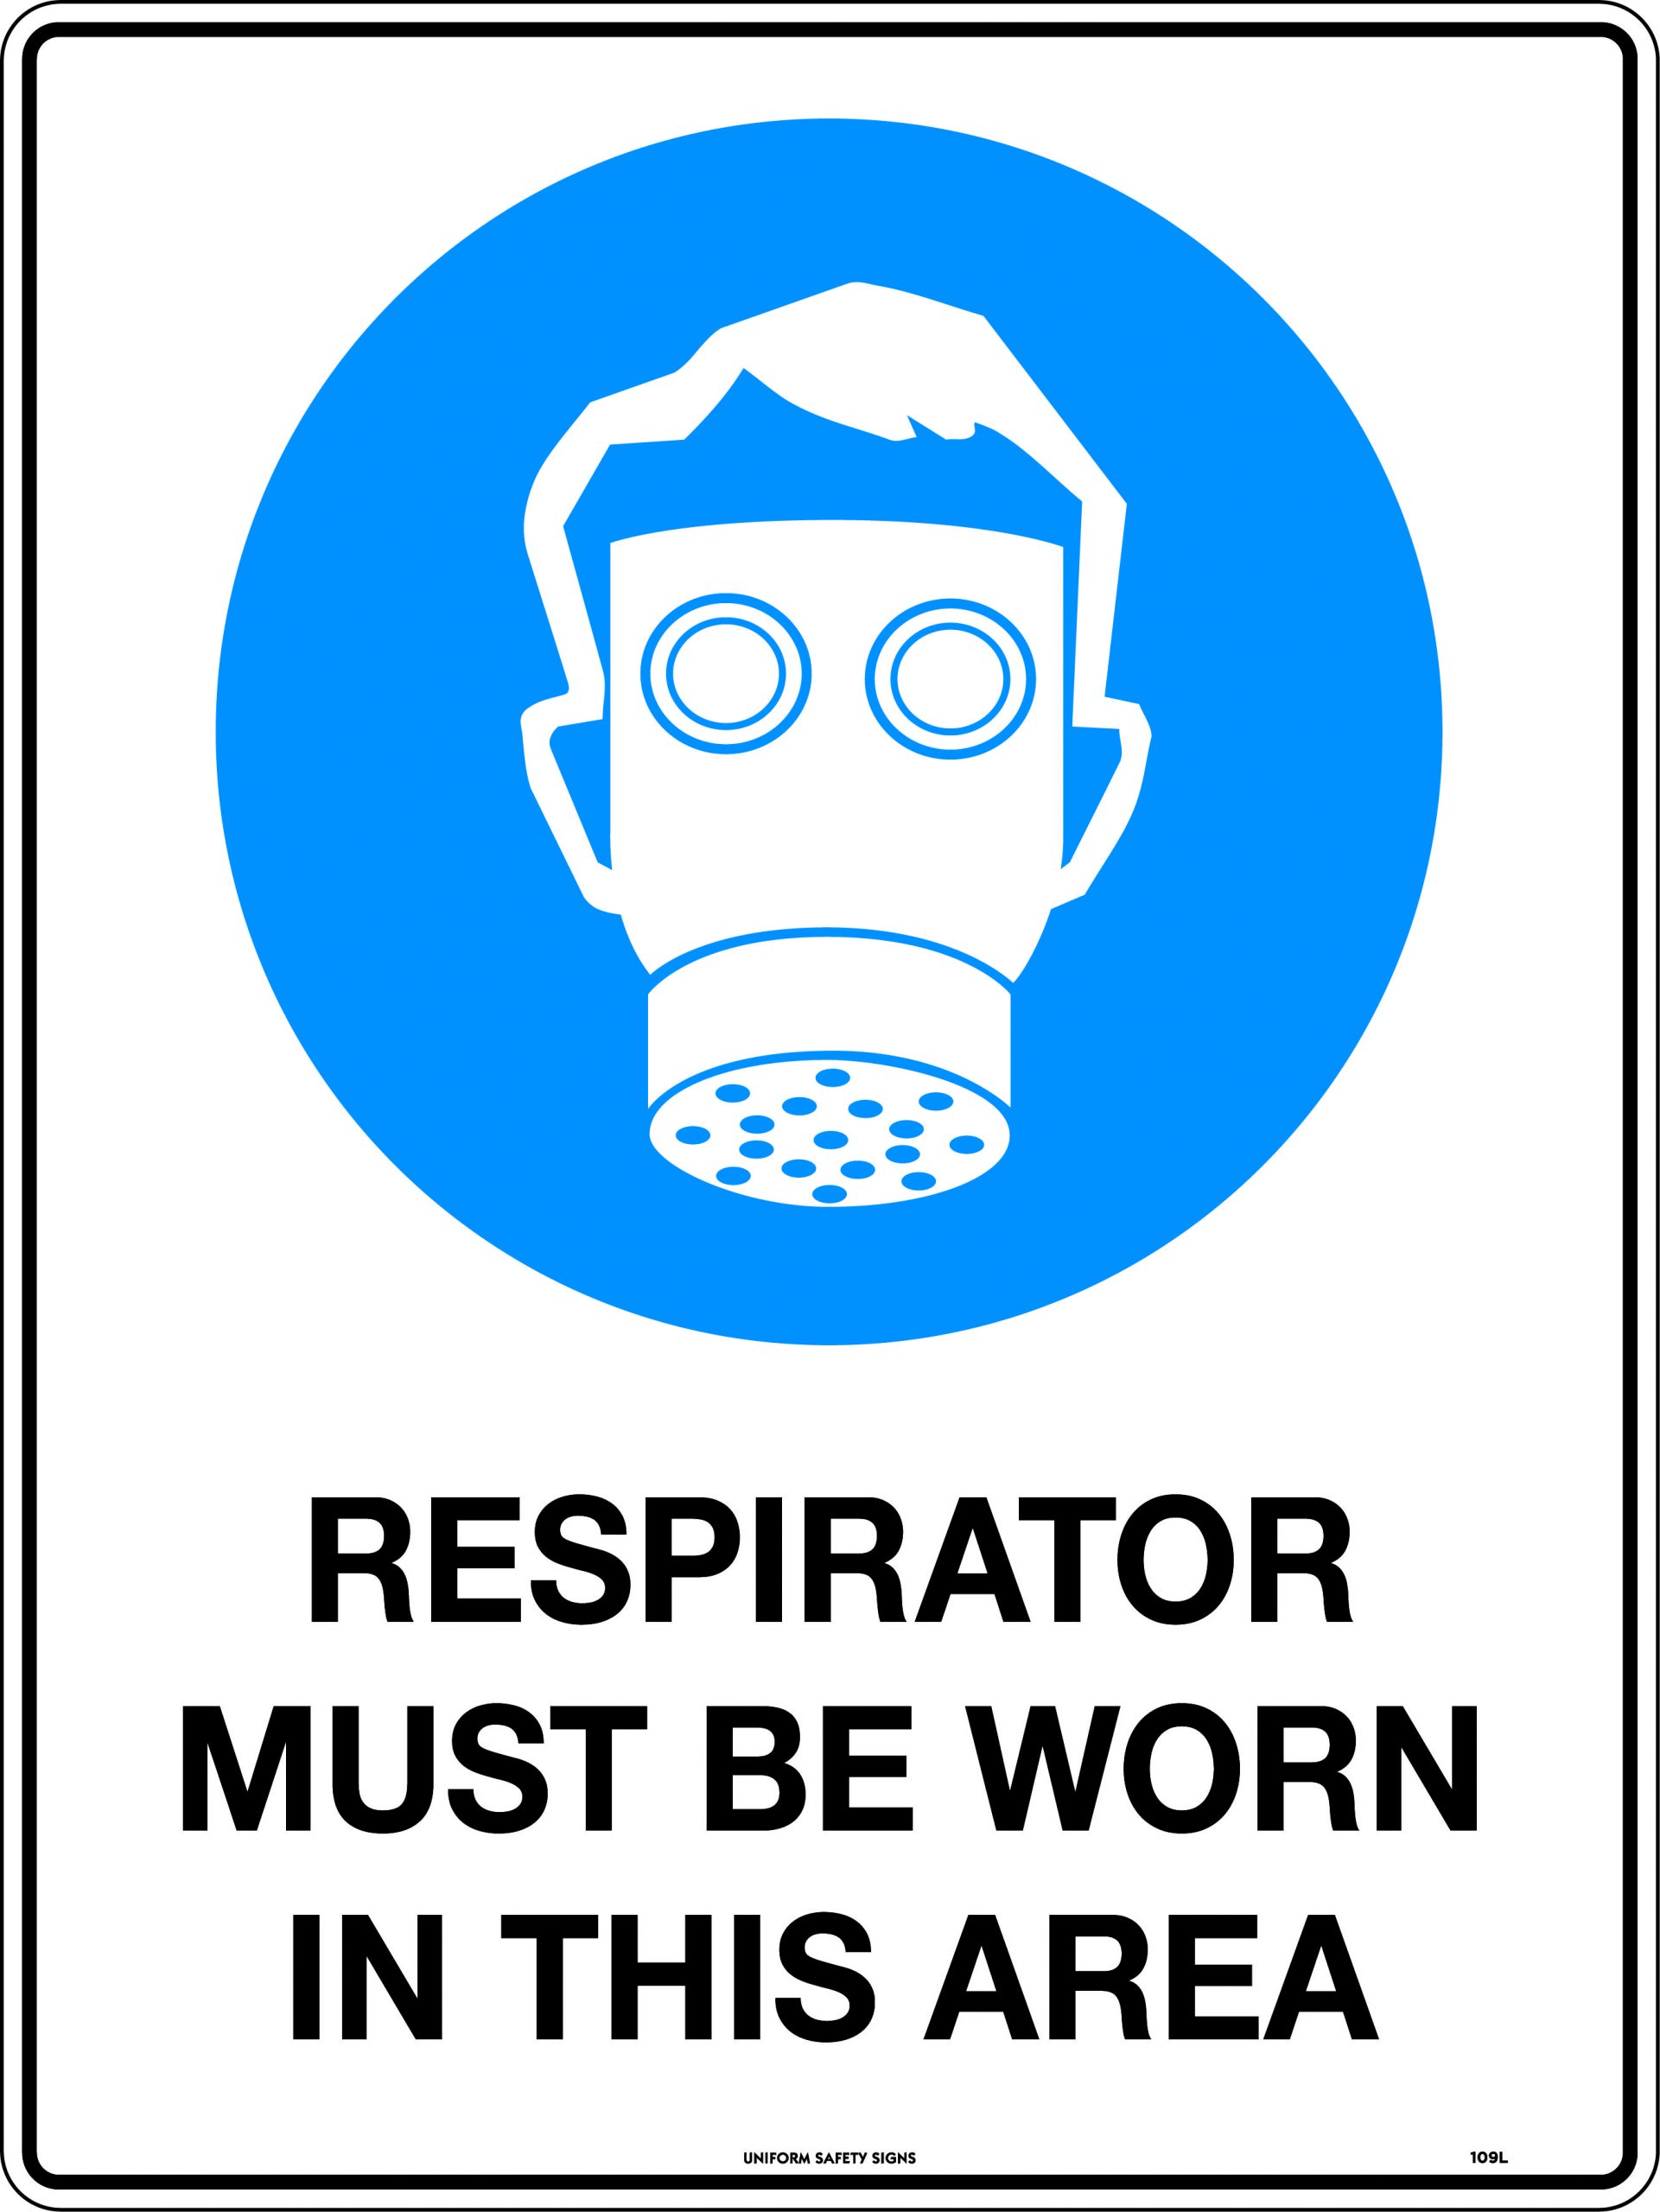 UNIFORM SAFETY 450X300MM METAL RESPIRATOR MUST BE WORN IN THIS AREA